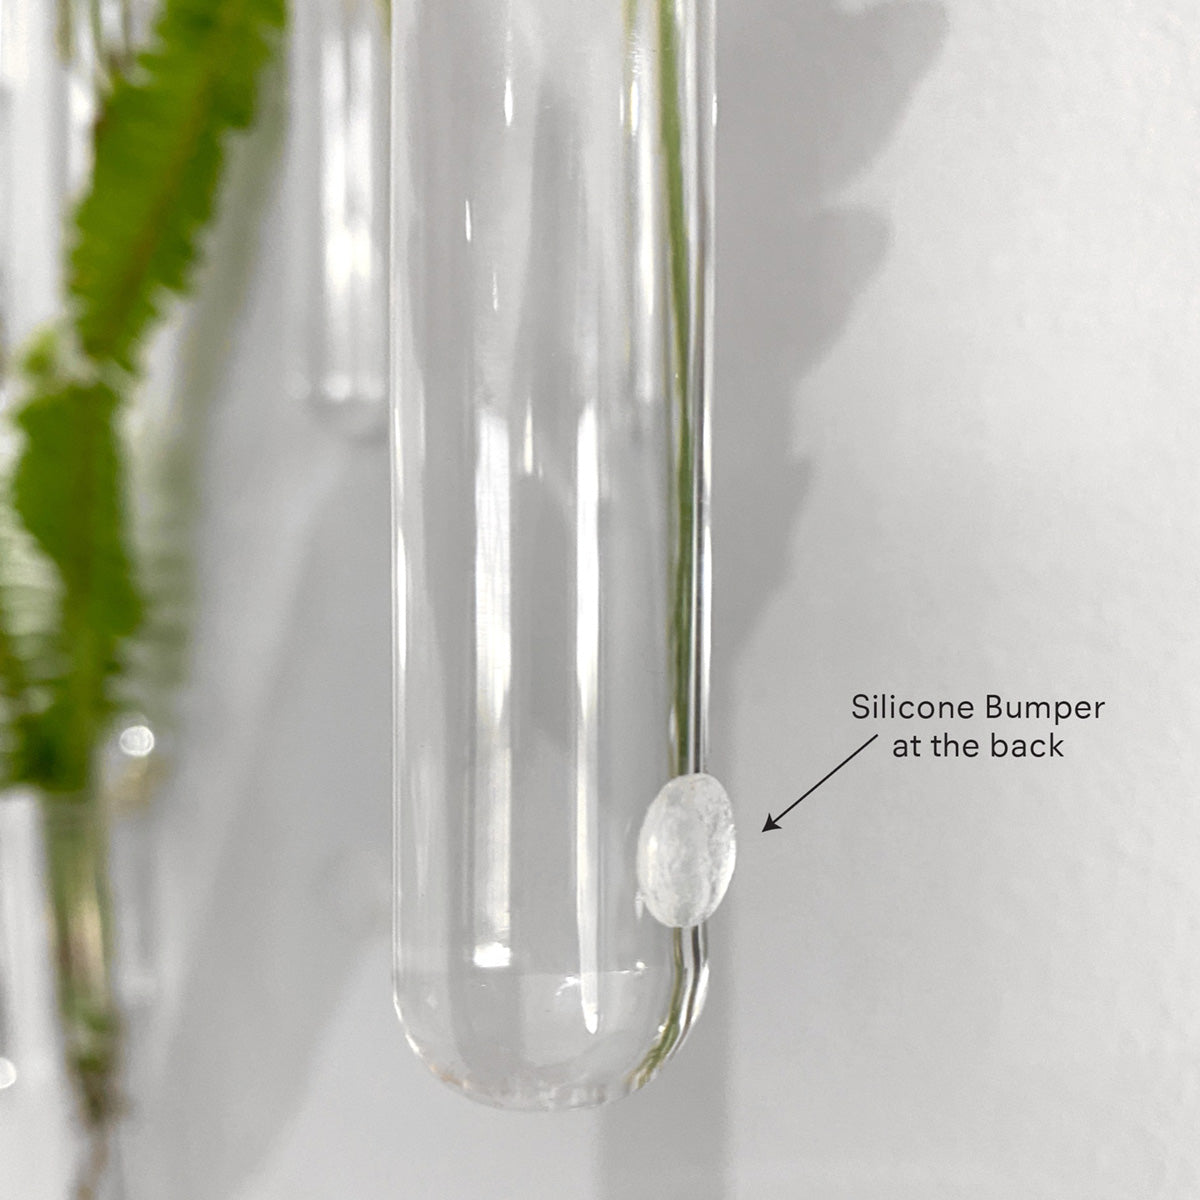 Clear Test Tube Plant Holder showing a close up photo of the silicone bumper on the backside of the tube